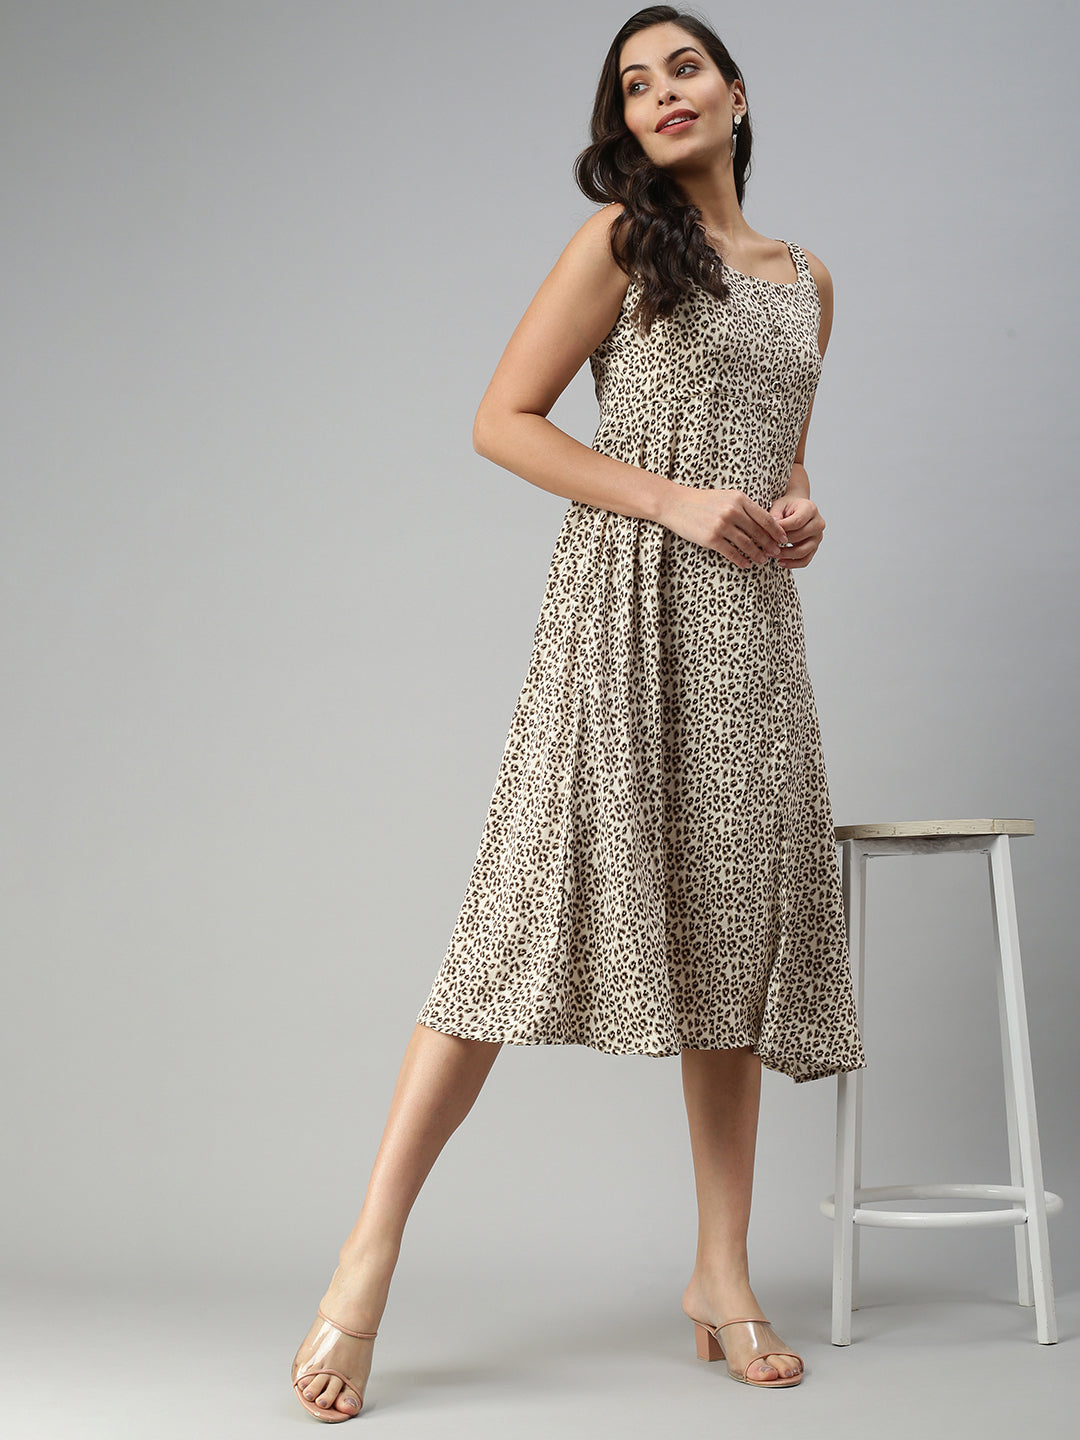 Women's Animal Beige Fit and Flare Dress